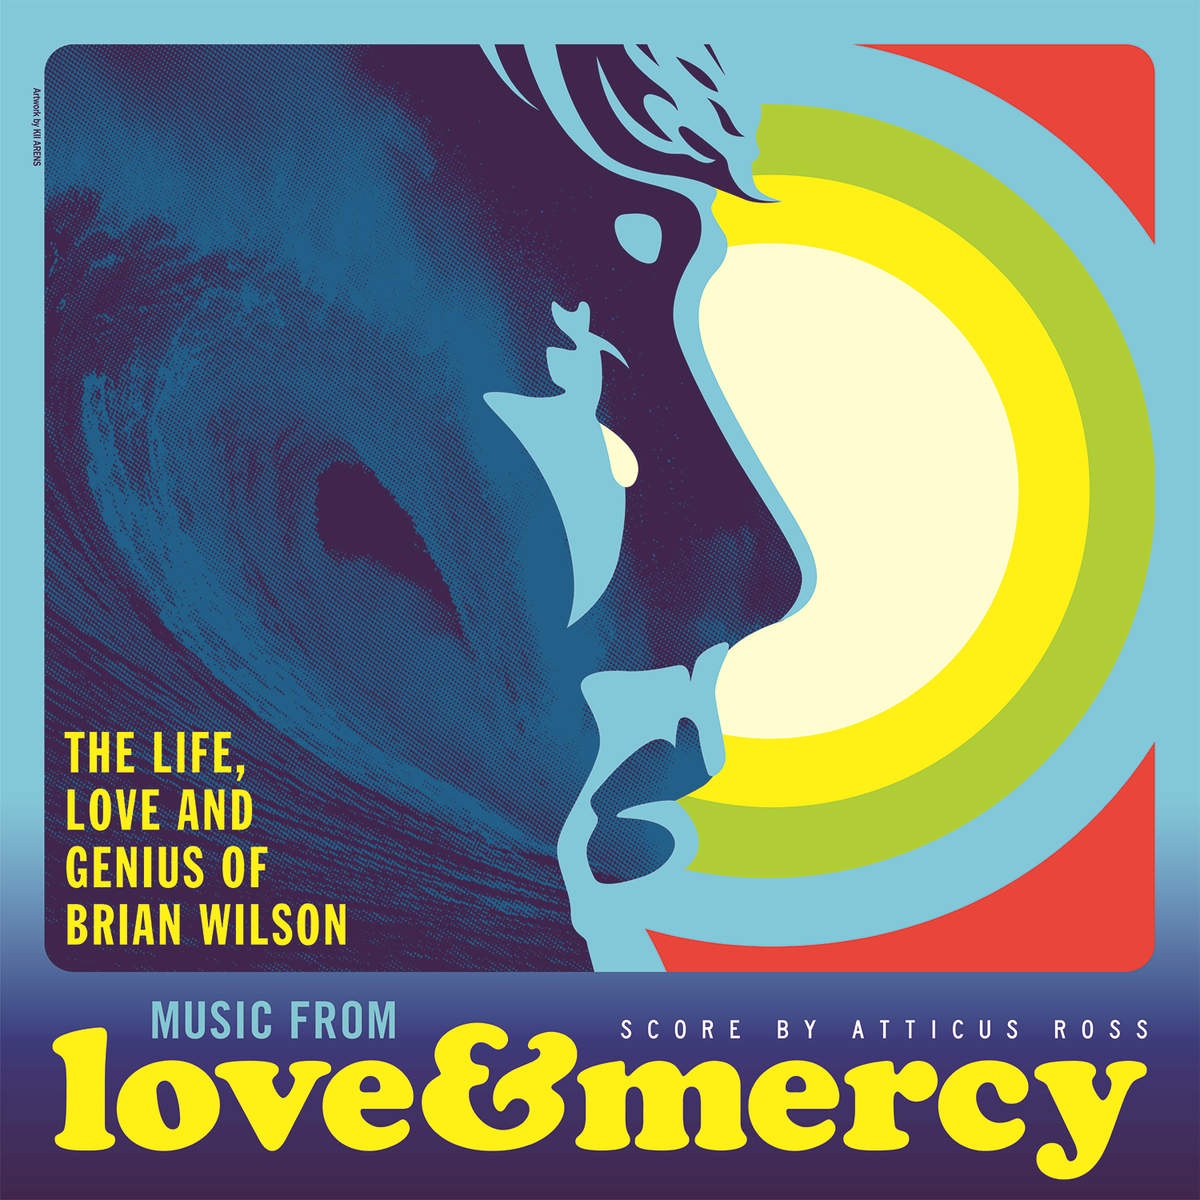 The Bed Montage - From “Love & Mercy – The Life, Love And Genius Of Brian Wilson” Soundtrack